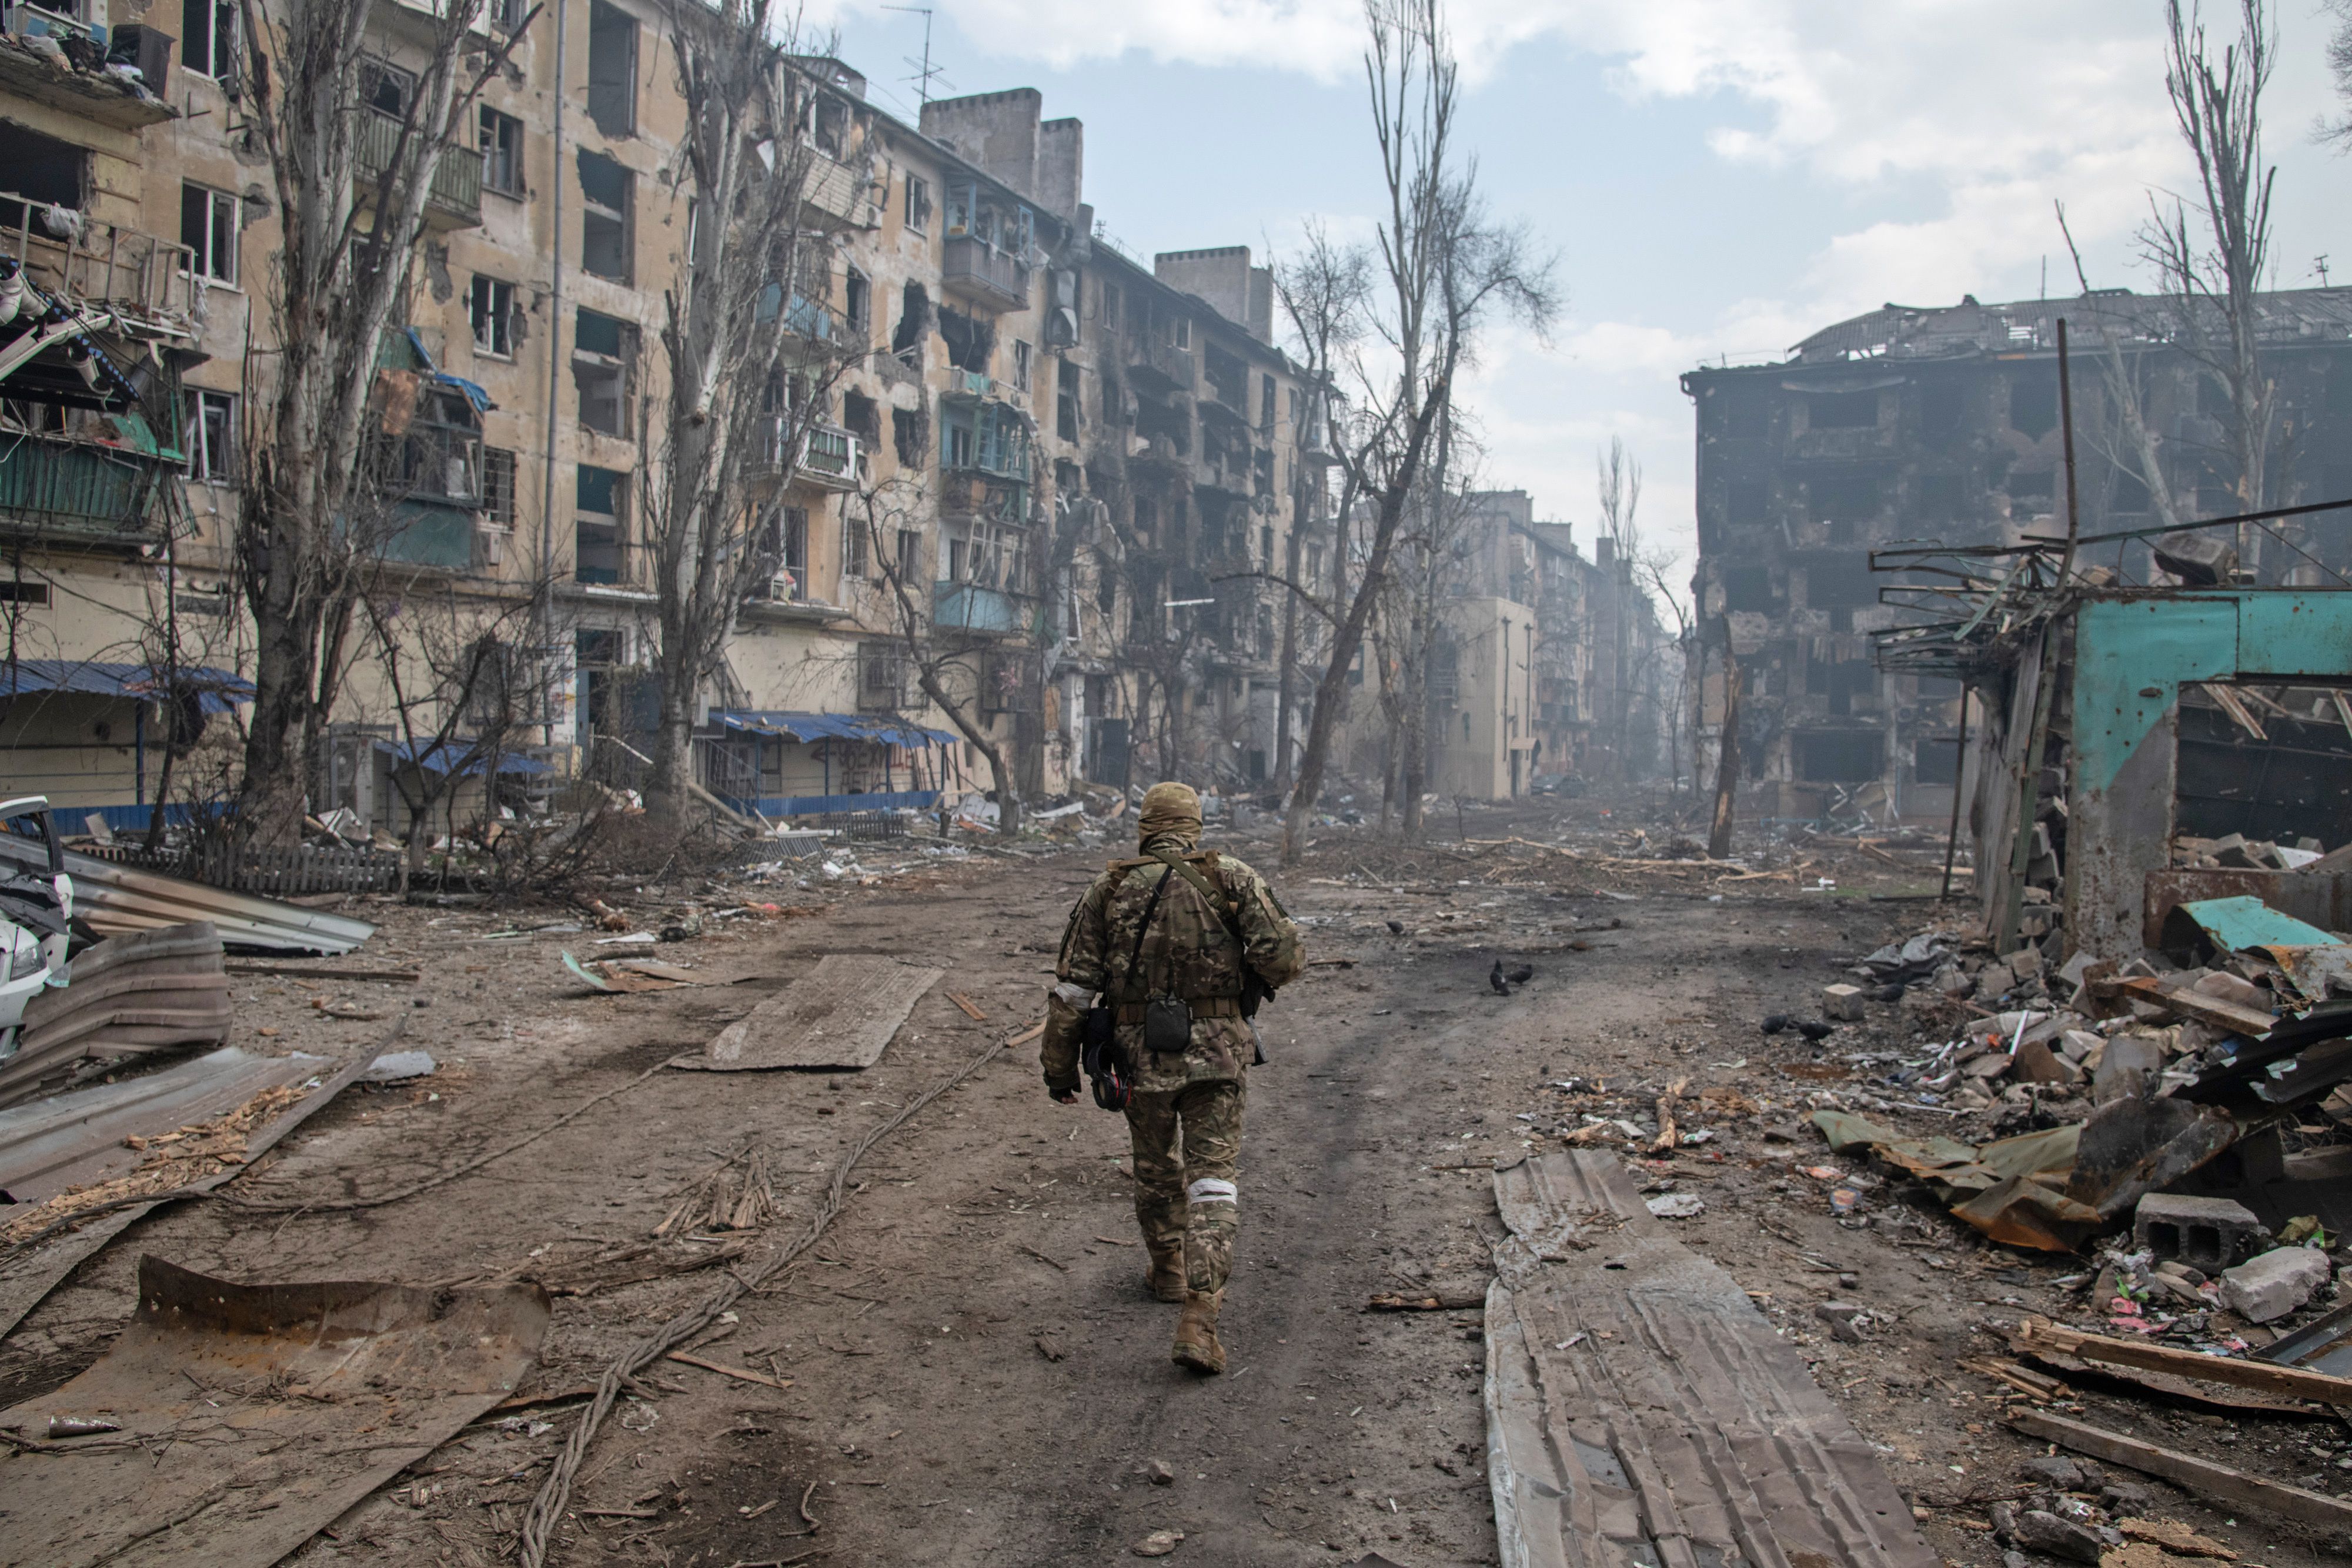 A Russian soldier walks among the rubble east of Mariupol on April 15.